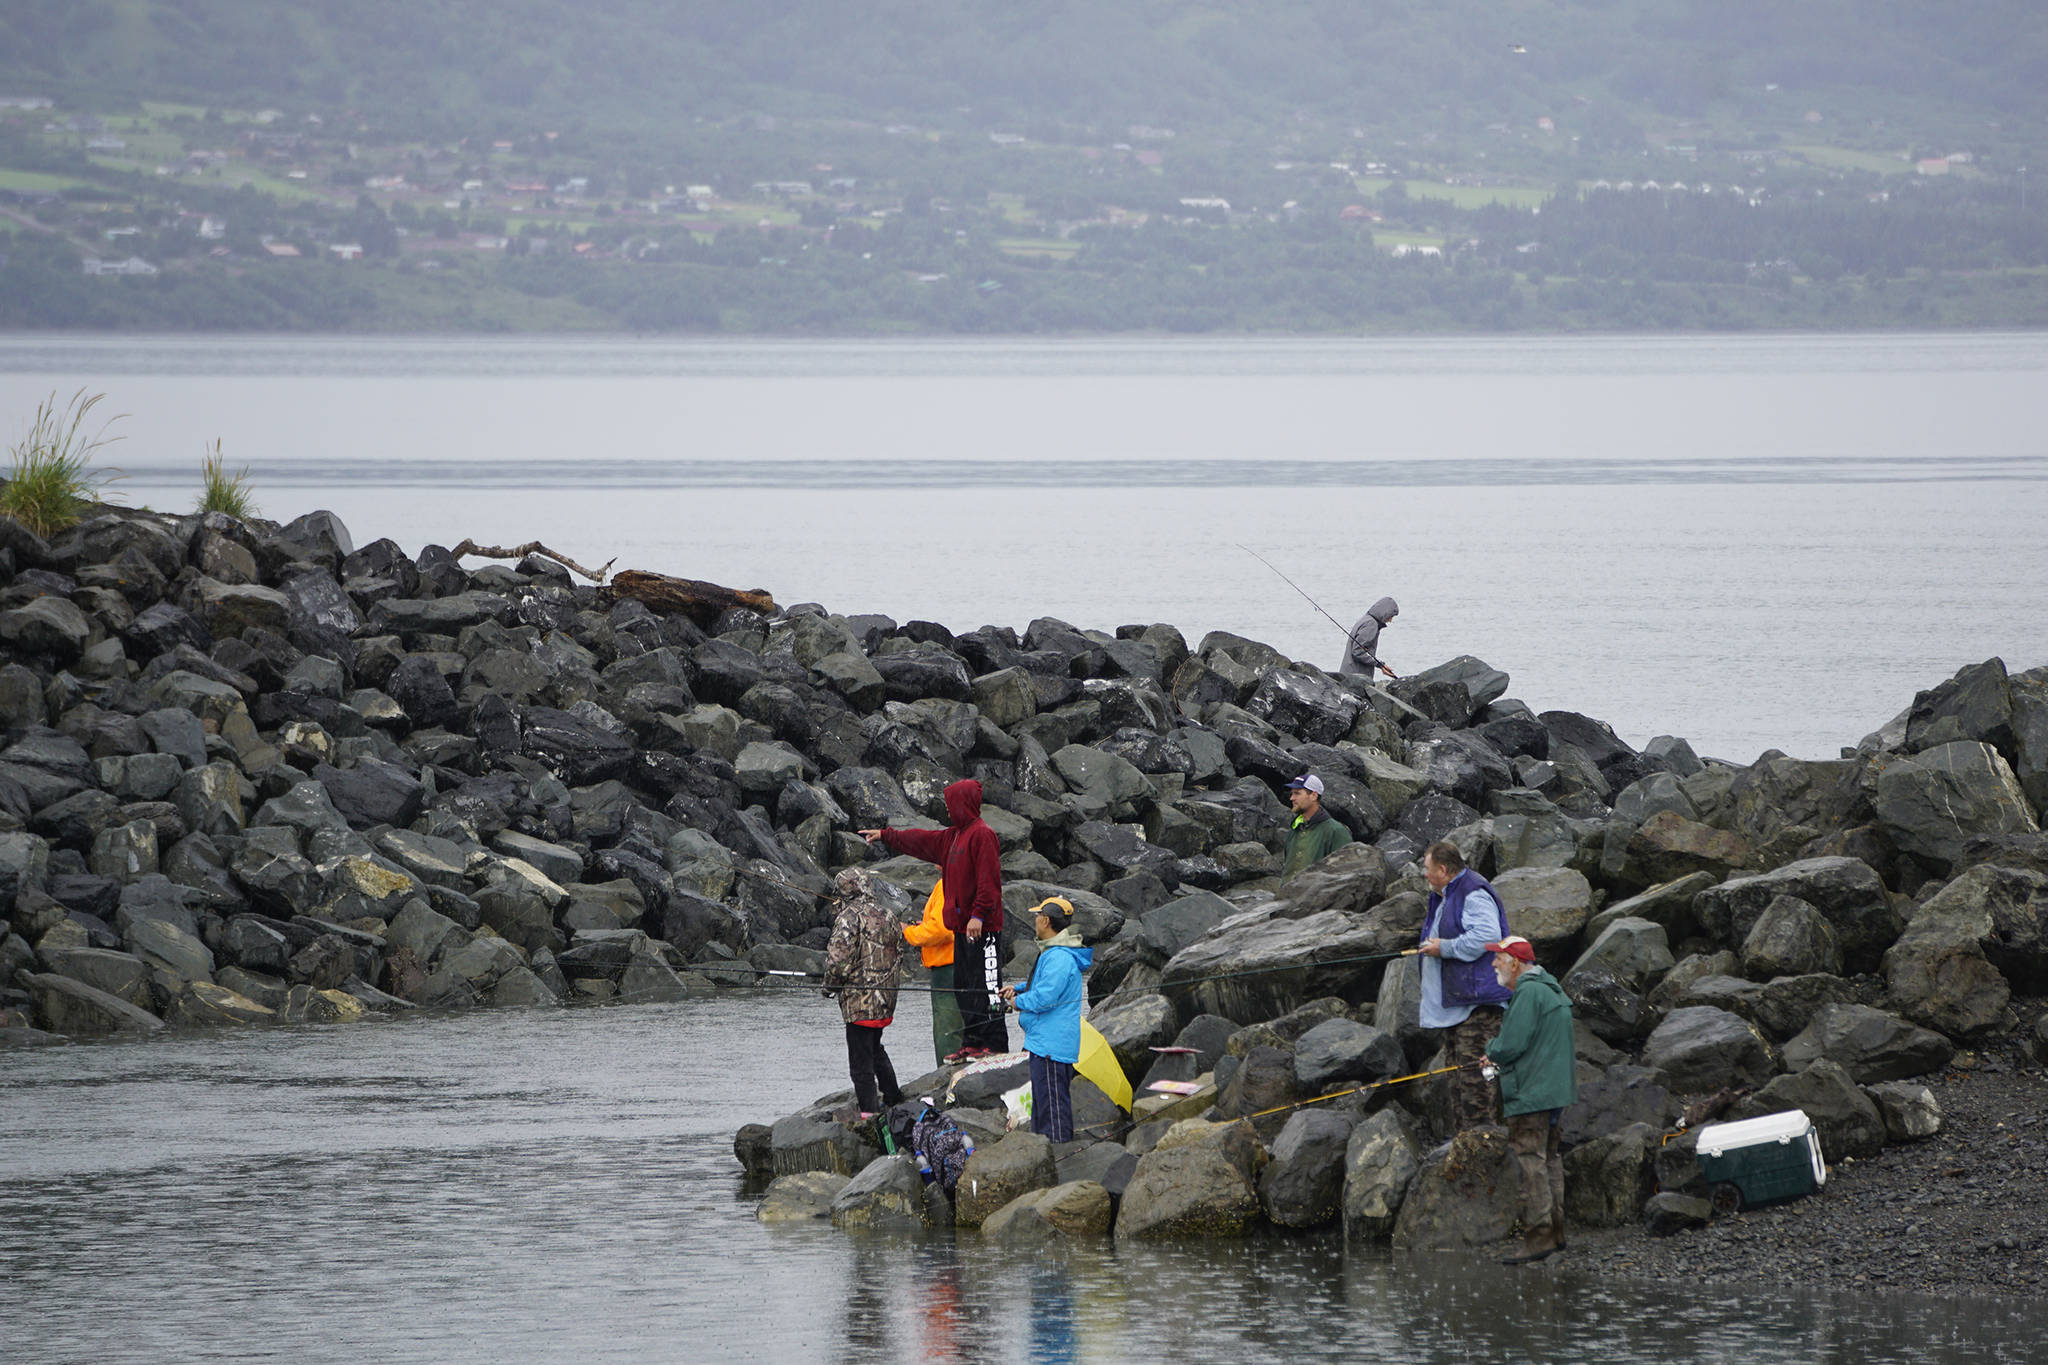 Anglers fish on July 15, 2019, at the mouth of the Nick Dudiak Fishing Lagoon in Homer, Alaska. Rain fell over the weekend after a weeks-long stretch of sunny weather. (Photo by Michael Armstrong/Homer News)